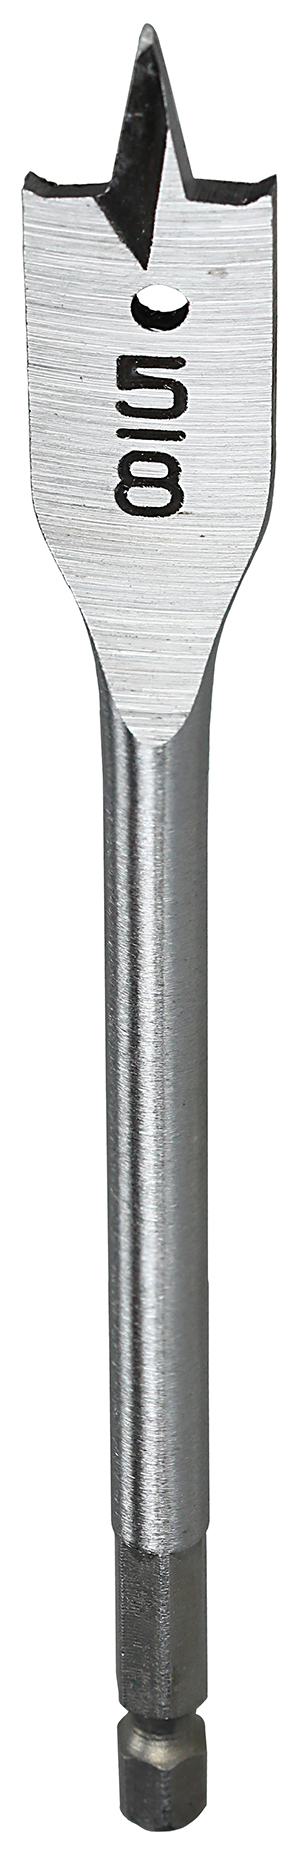 Spade Drill Bit, 5/8 in. Size, Hex shank type, Cold Forged Steel material, 6 in. drilling depth